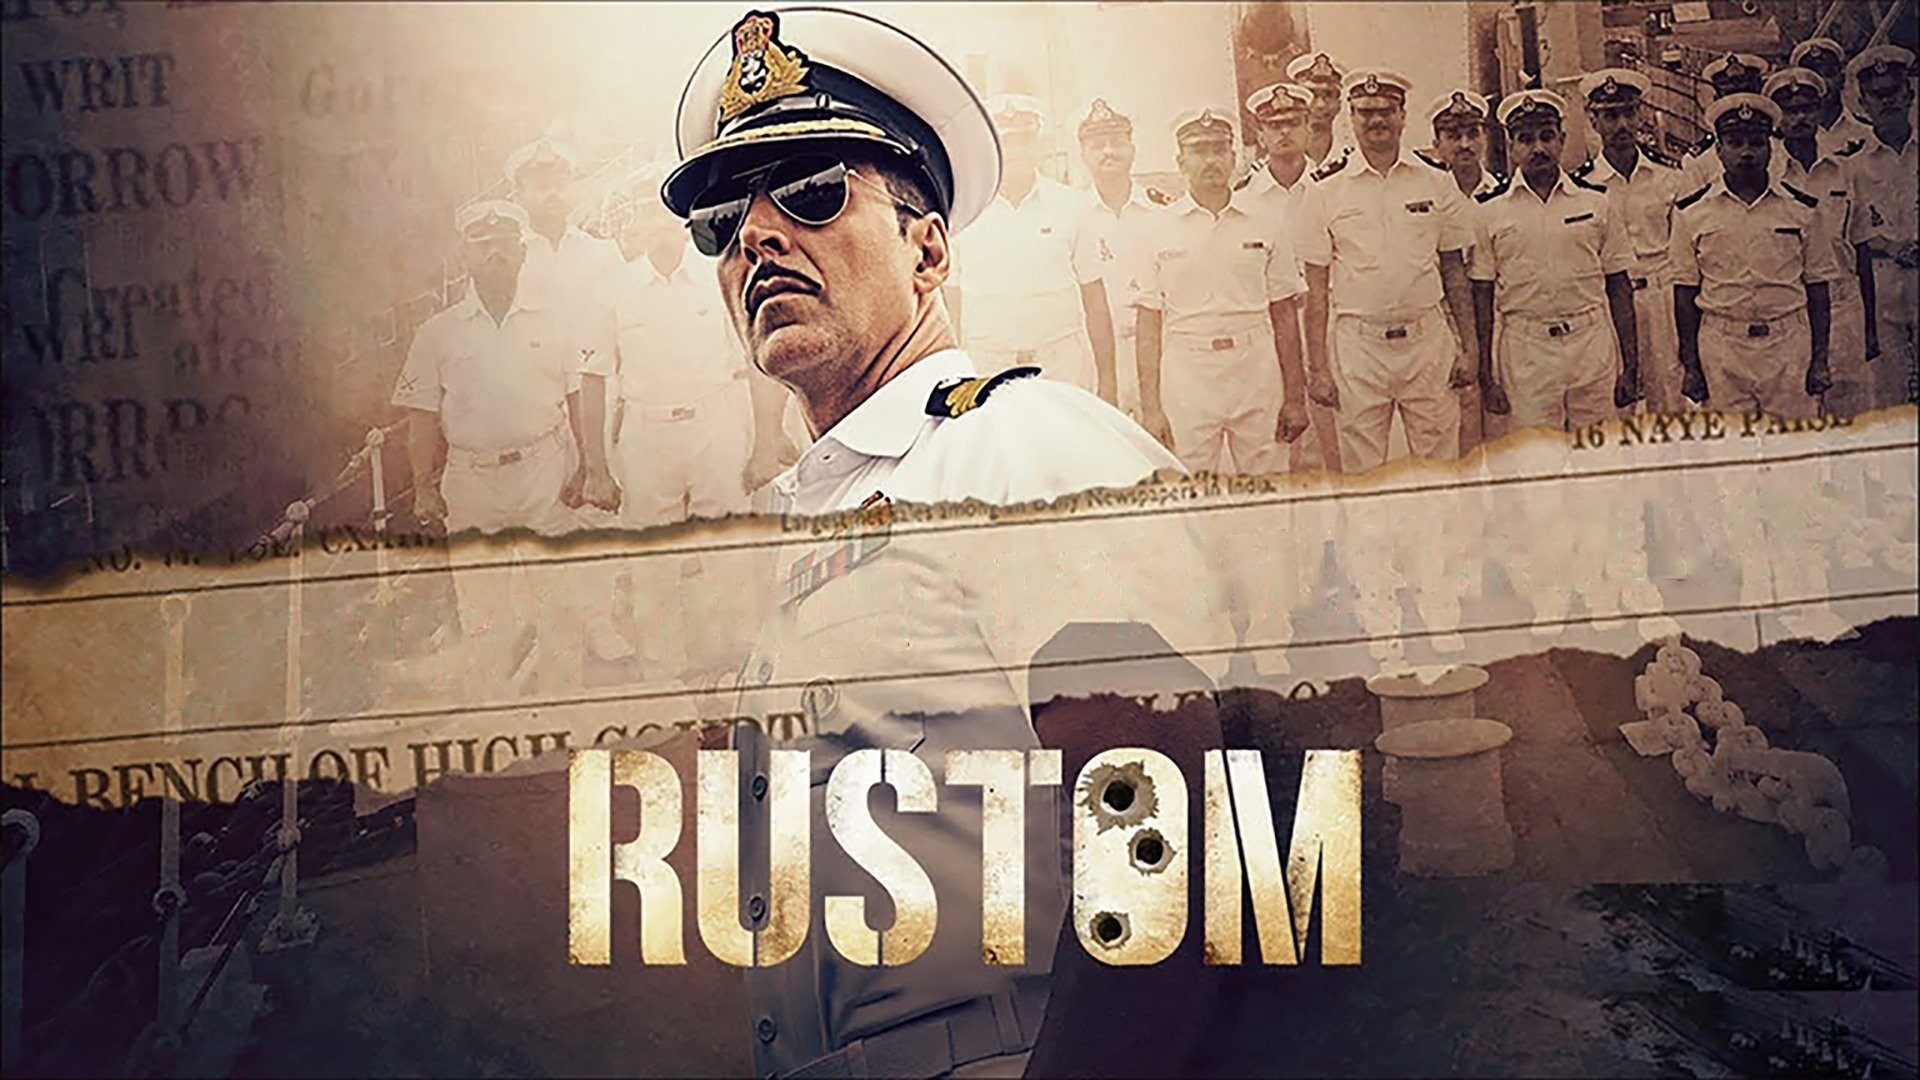 Zee Content Sales - Watch story of Rustom Pavri, a naval officer who shot  down his wife's lover and the story unfolds when the investigation starts  after he immediately surrenders. https://www.youtube.com/watch?v=L83qMnbJ198  #Rustom #